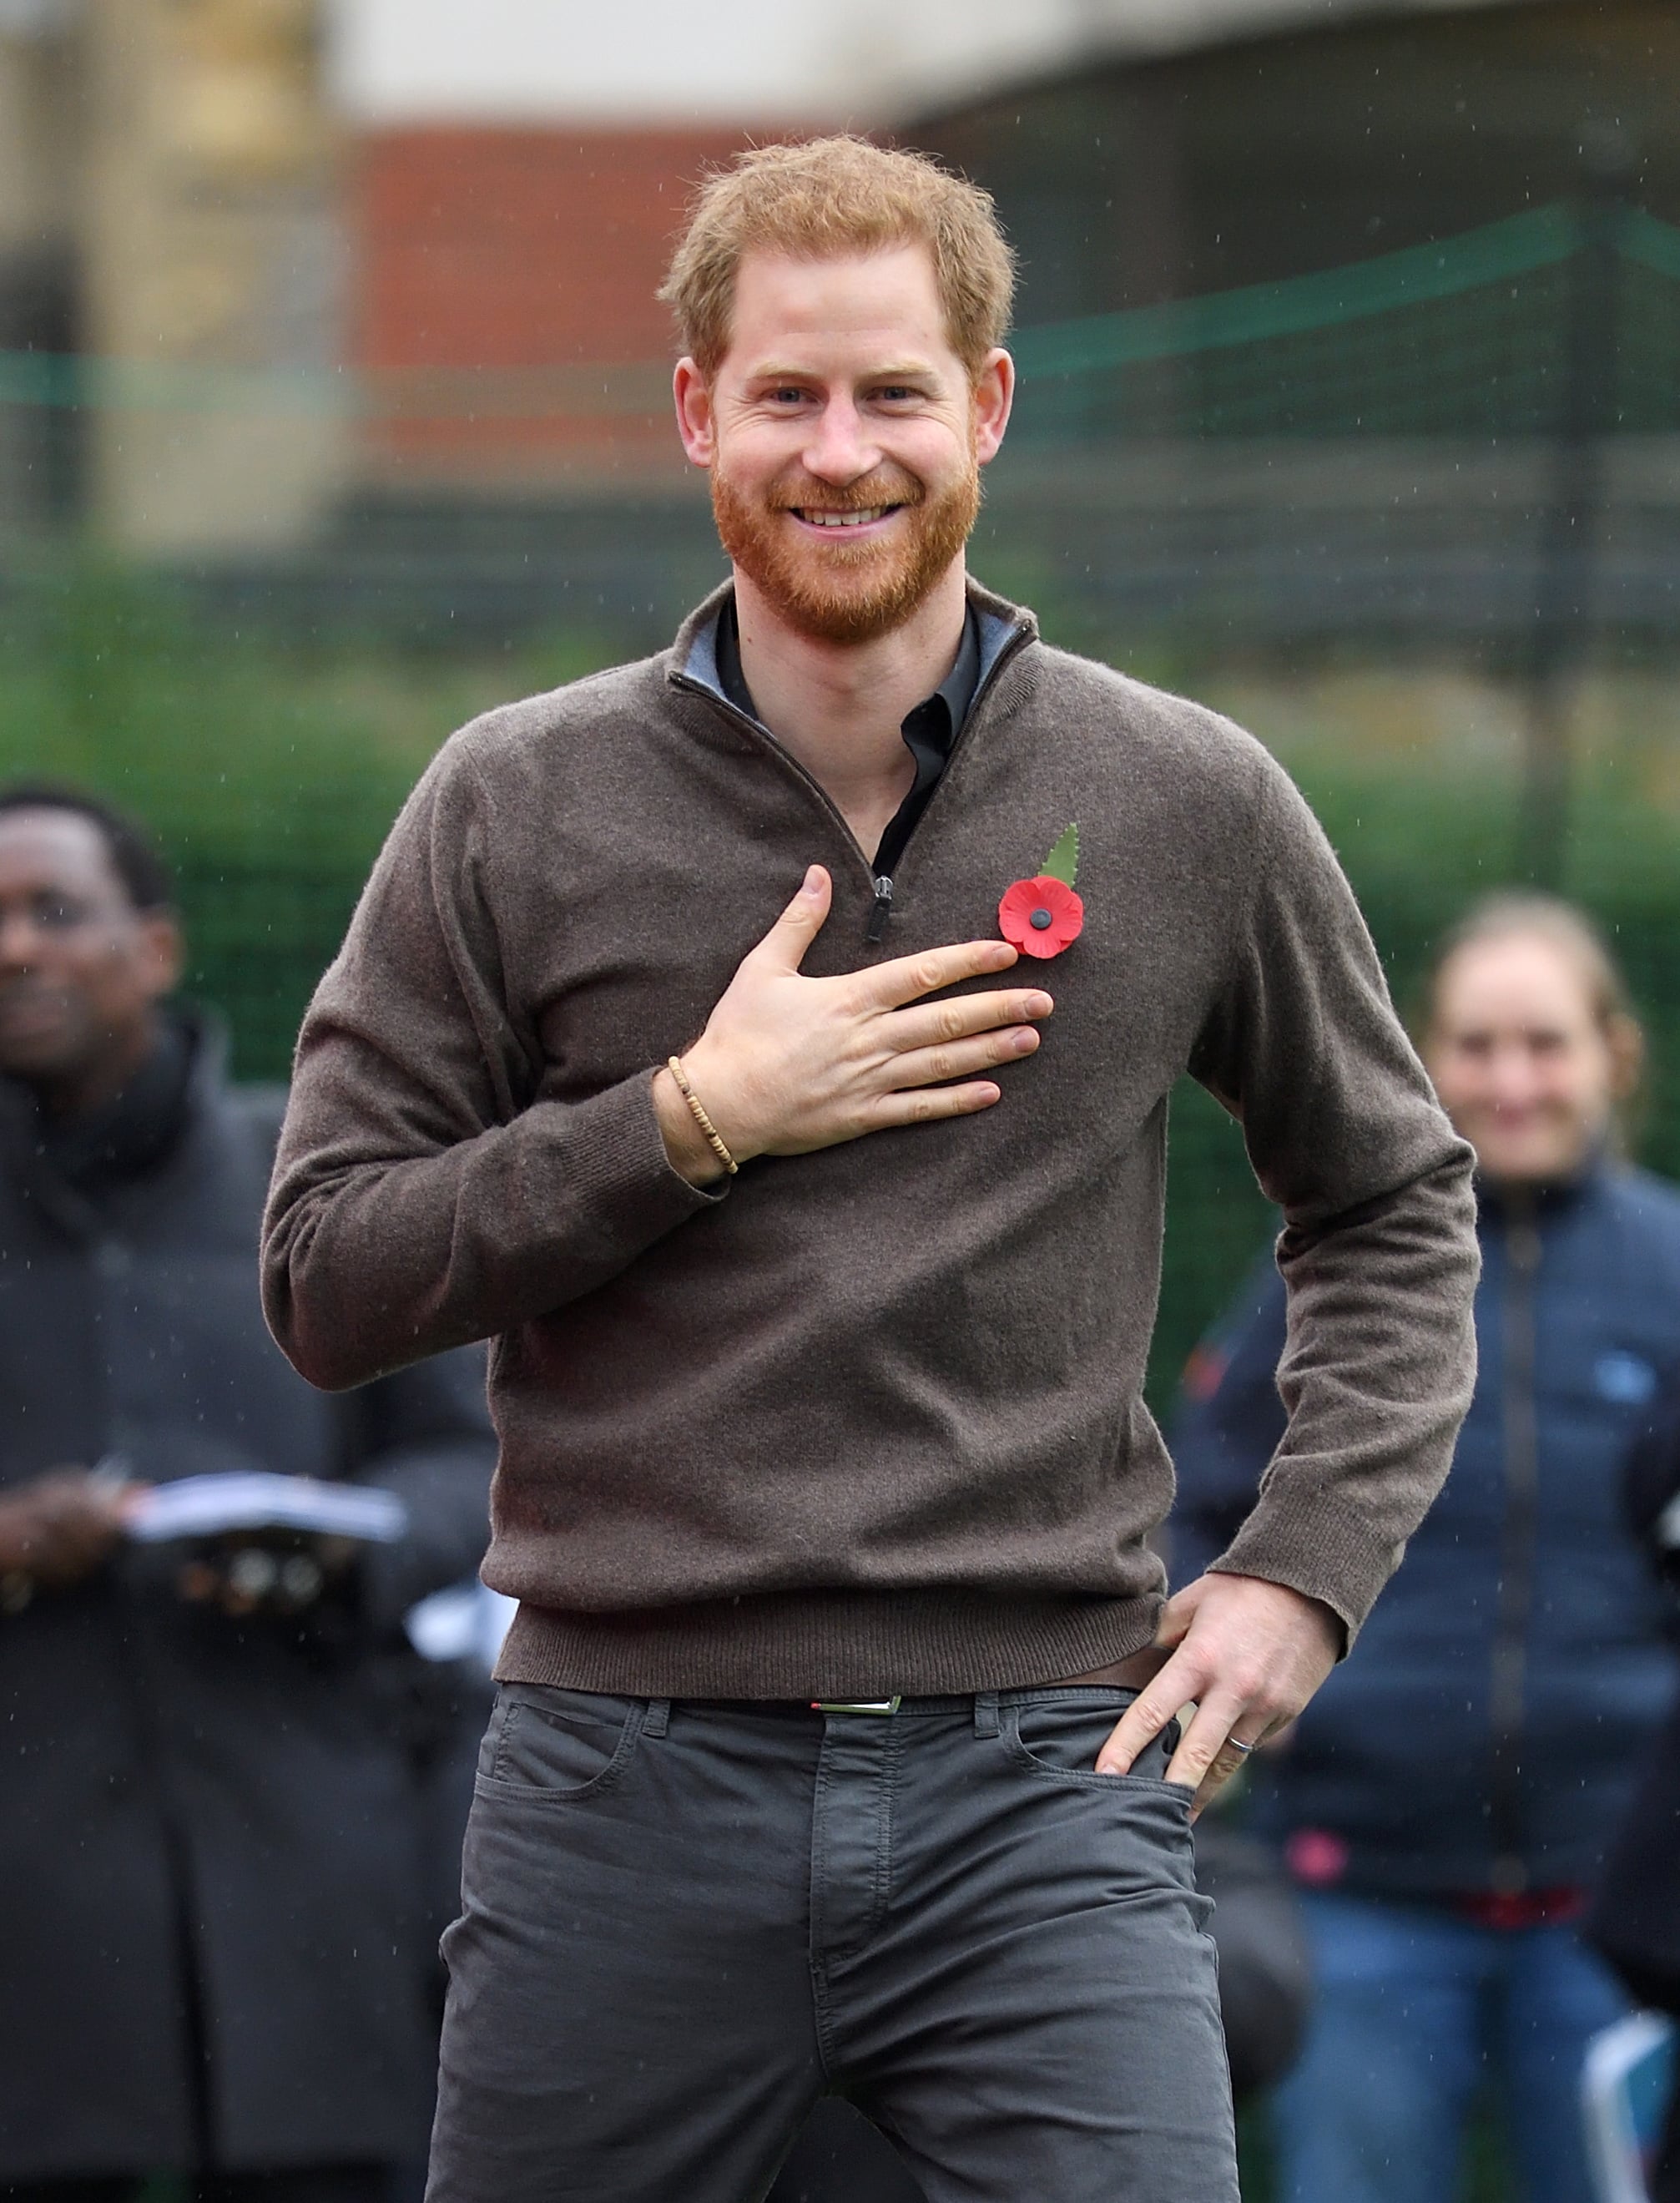 LONDON, ENGLAND - OCTOBER 29: Prince Harry, Duke of Sussex attends the launch of Team UK for the Invictus Games The Hague 2020 at Honourable Artillery Company on October 29, 2019 in London, England. HRH is Patron of the Invictus Games Foundation. (Photo by Karwai Tang/WireImage)